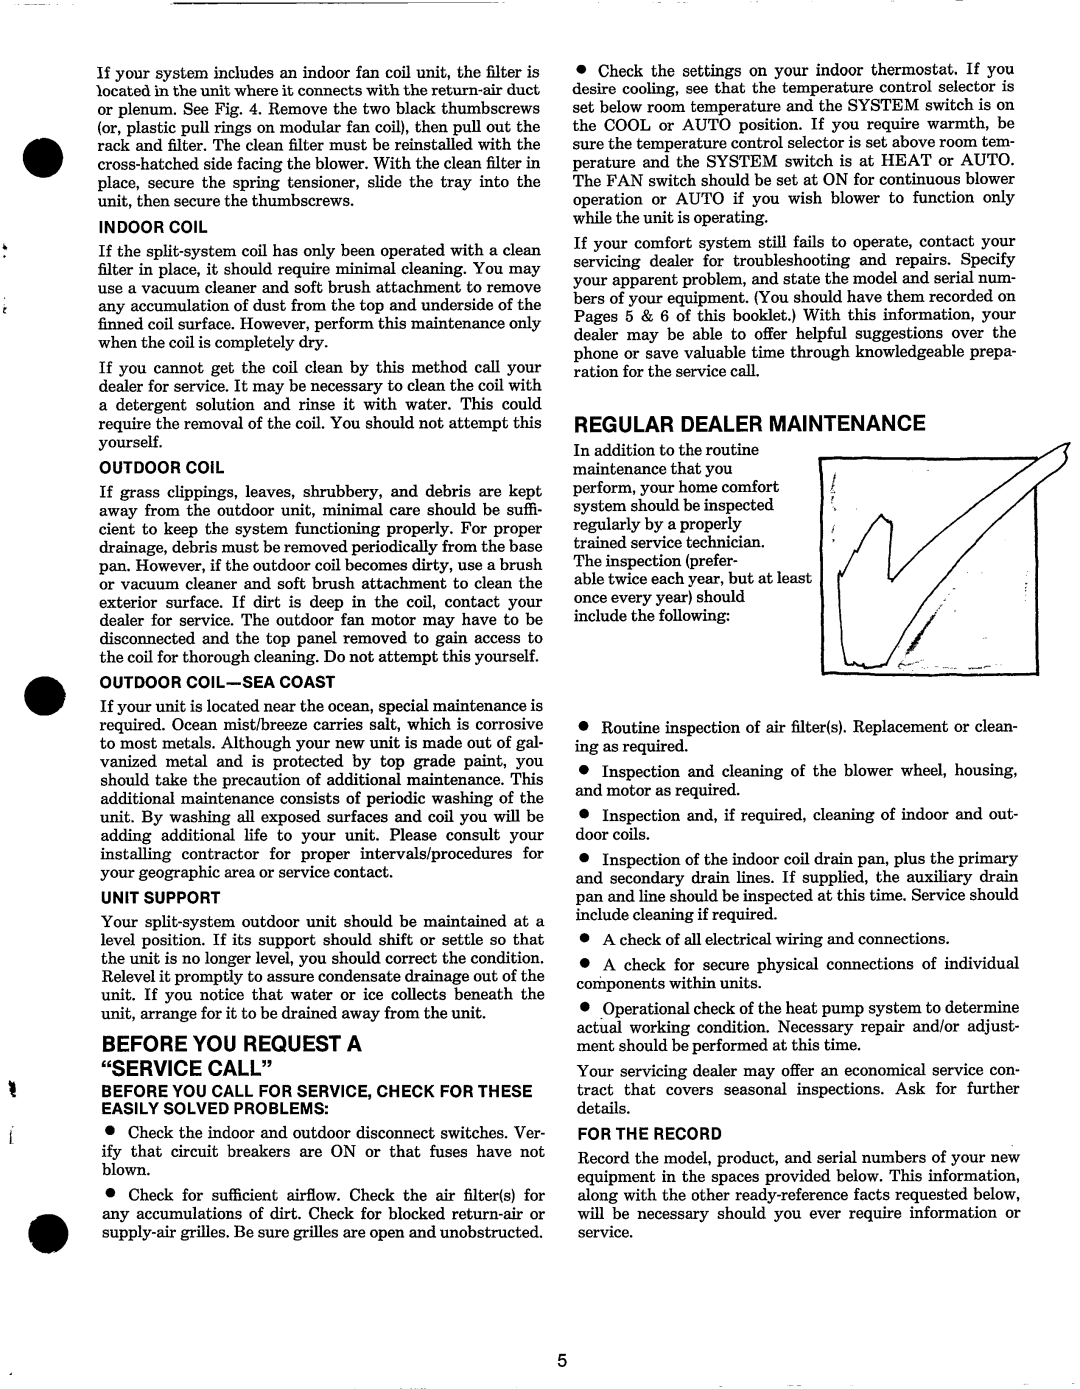 Carrier 2000 manual 